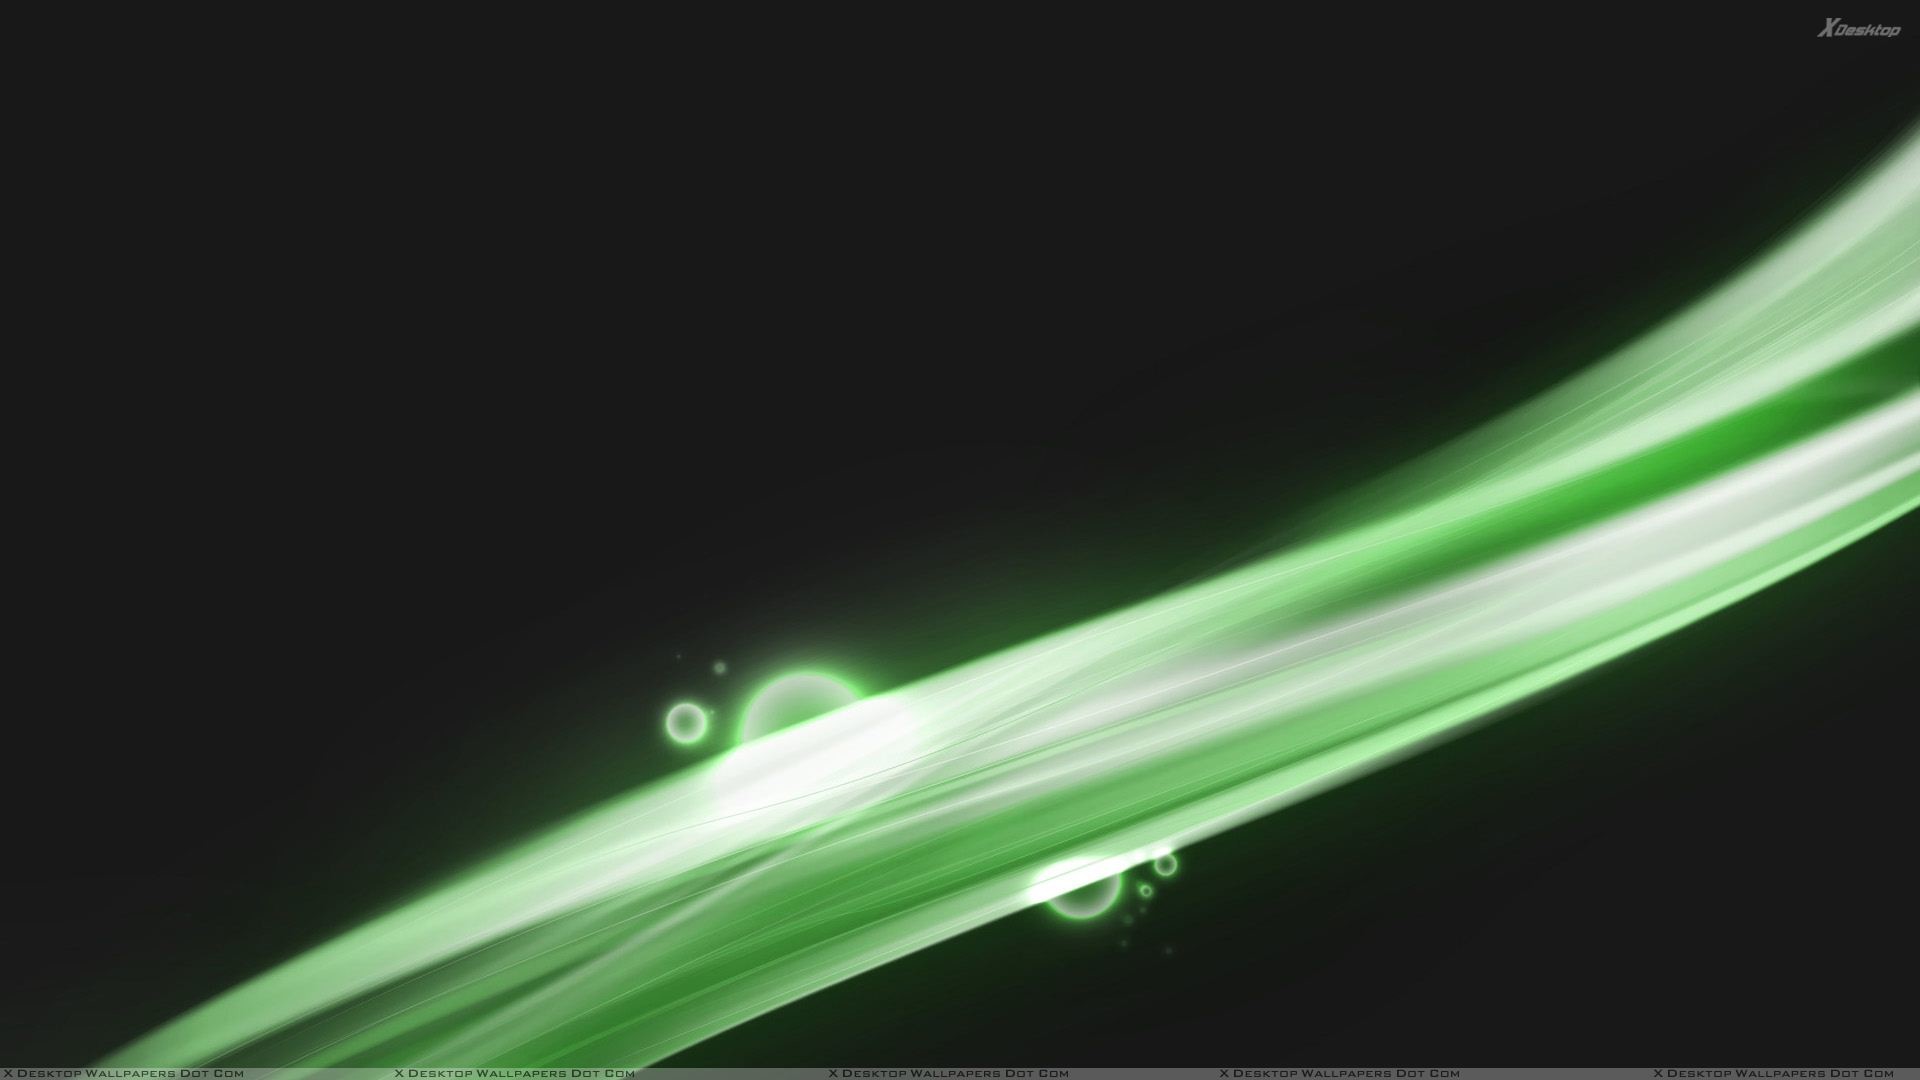 Green and Black Abstract Wallpaper (71+ images)